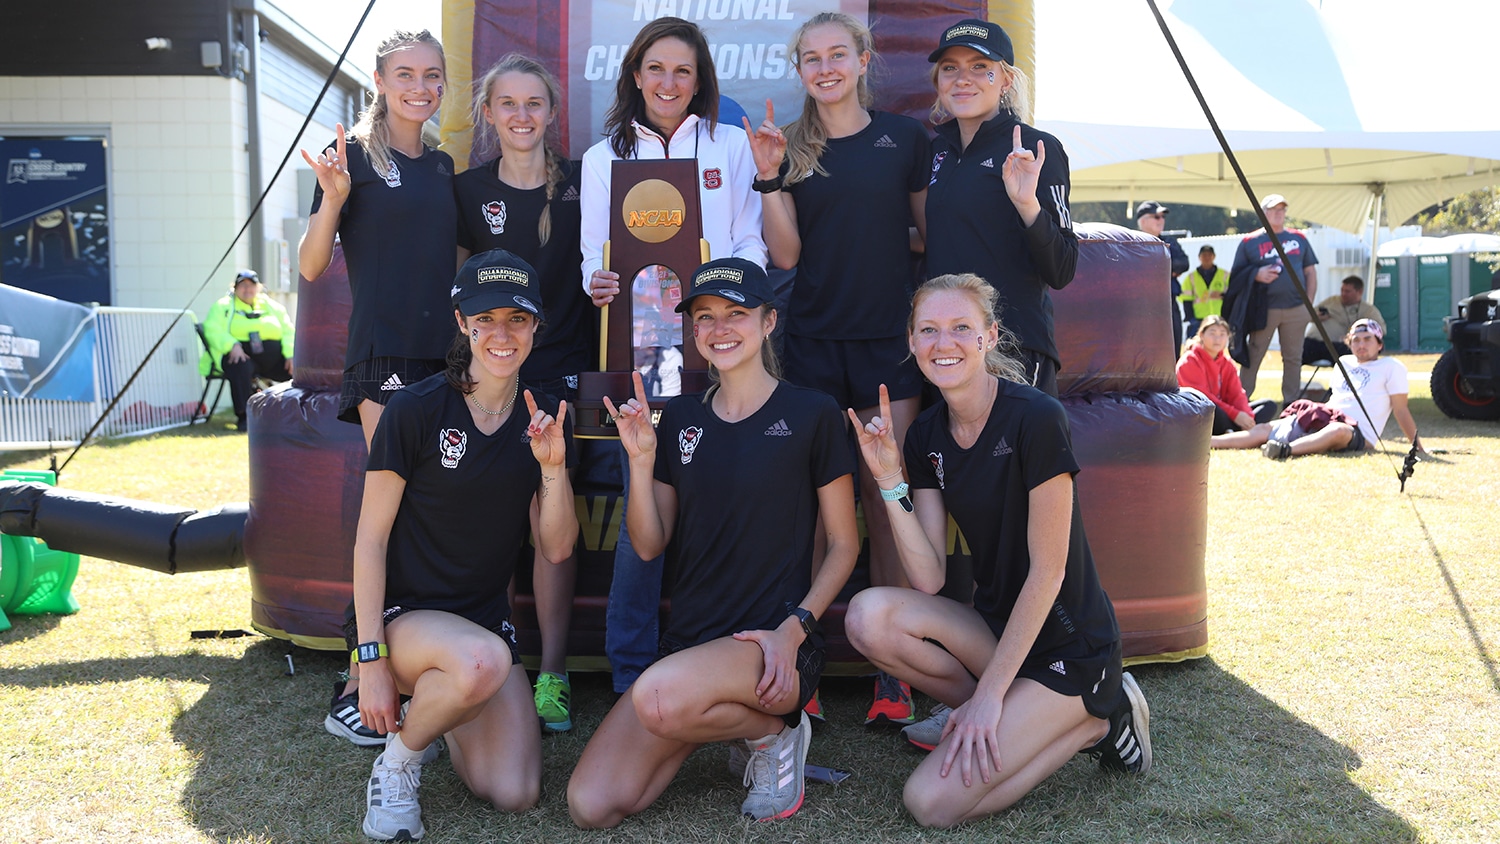 The 2021 NC State women's cross country team wins the NCAA Championship in Tallahassee, Florida.